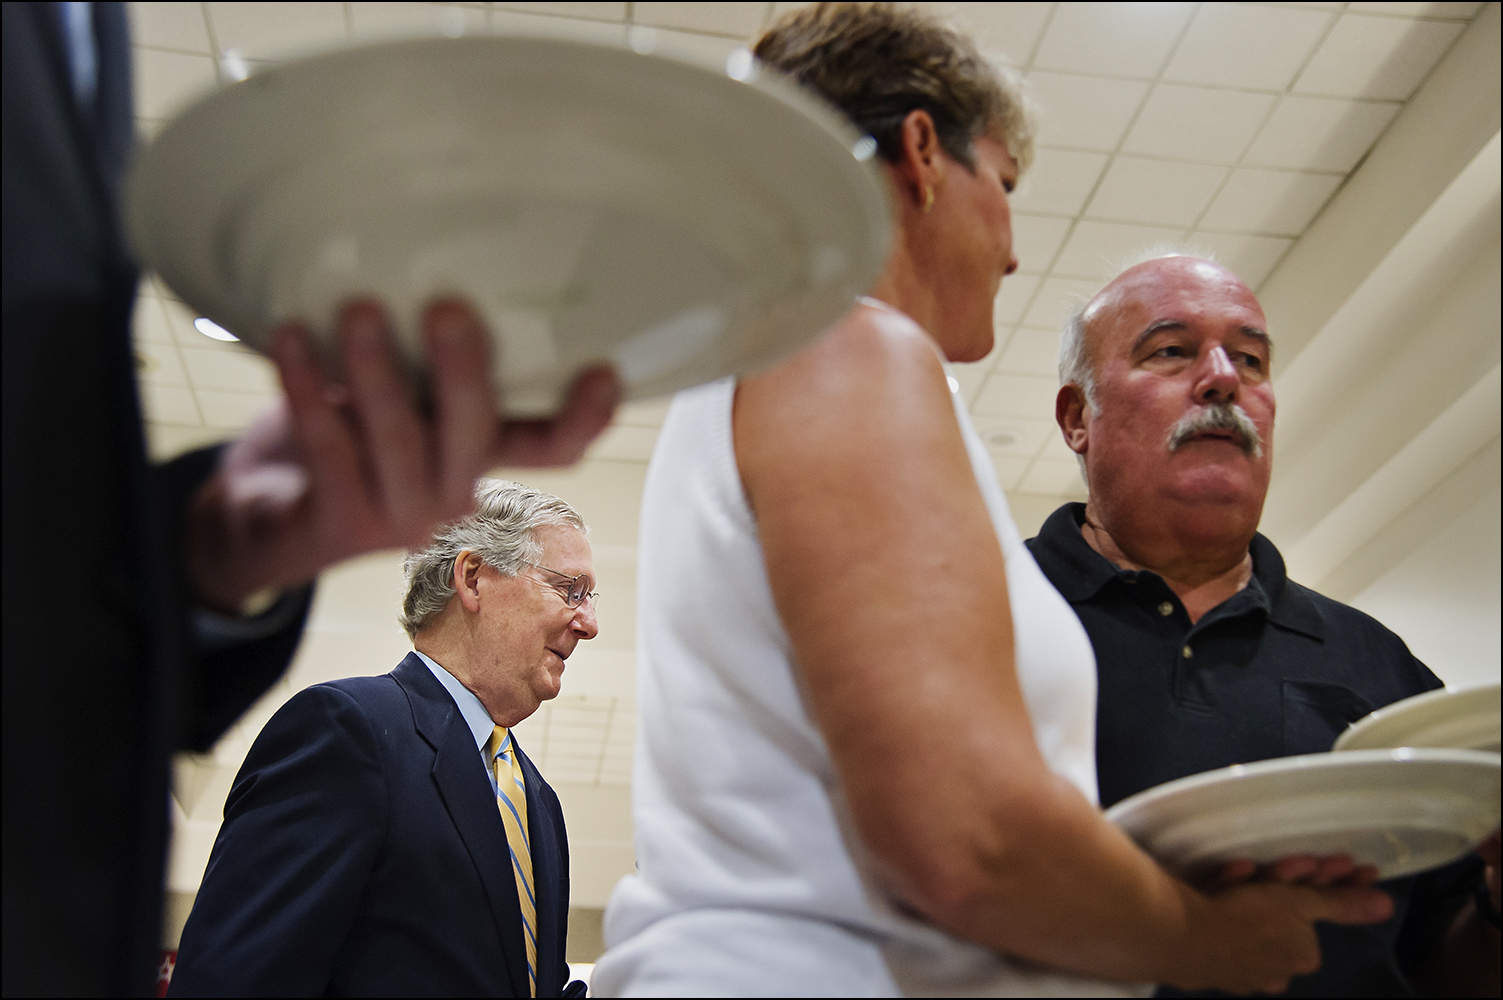  U.S. Senate Minority Leader Mitch McConnell talks with attendees before the 51st annual Kentucky Country Ham Breakfast at the state fair in Louisville, KY on Thursday, August 21, 2014. Photos by Brian Powers 